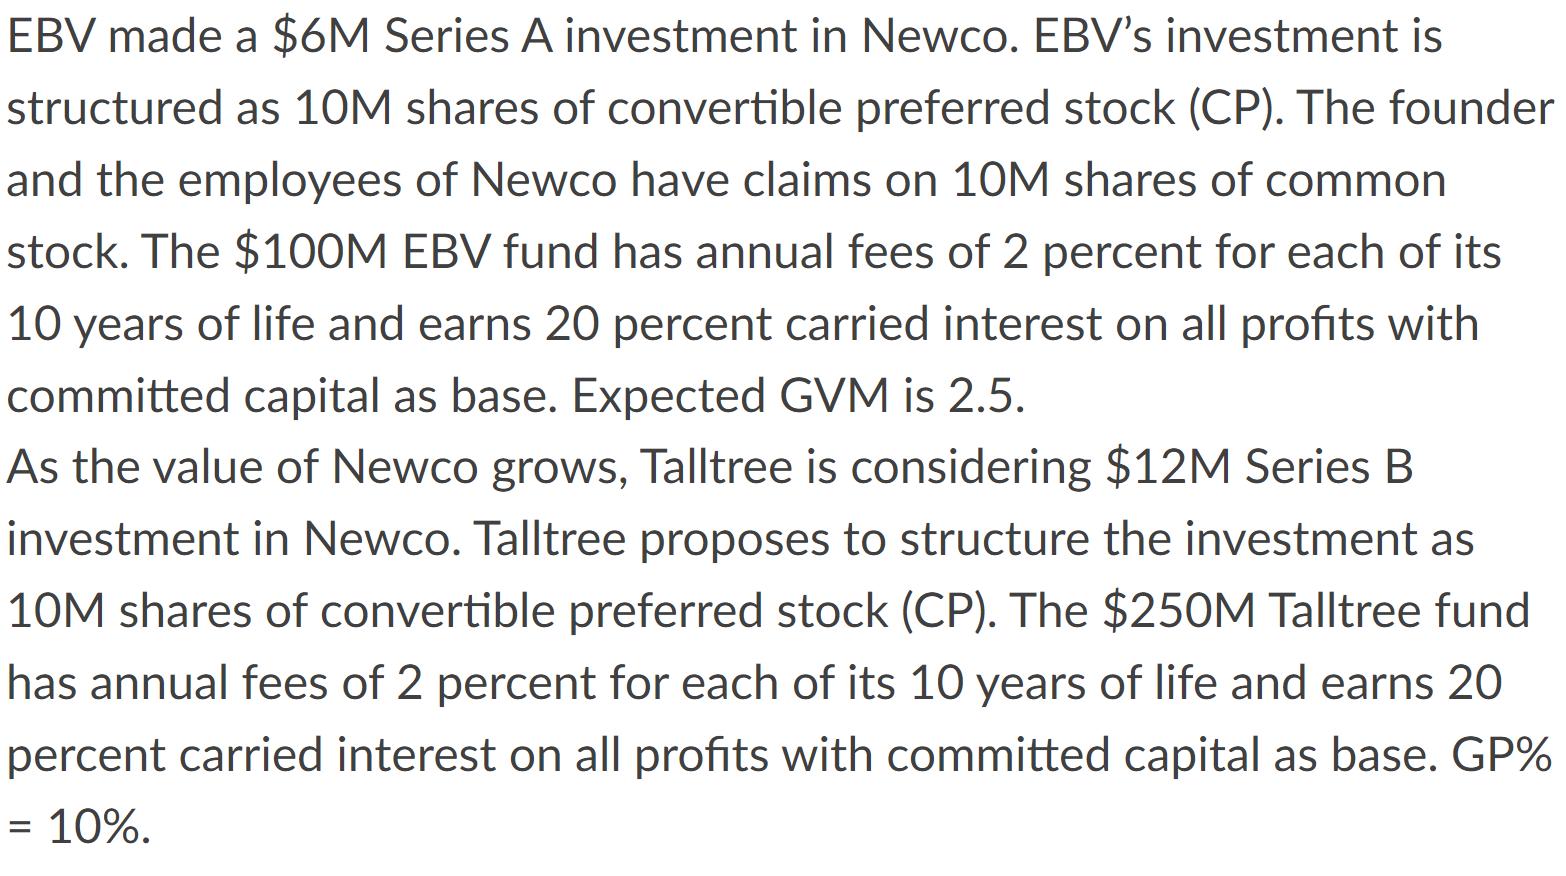 EBV made a $6M Series A investment in Newco. EBVs investment is structured as 10M shares of convertible preferred stock (CP)